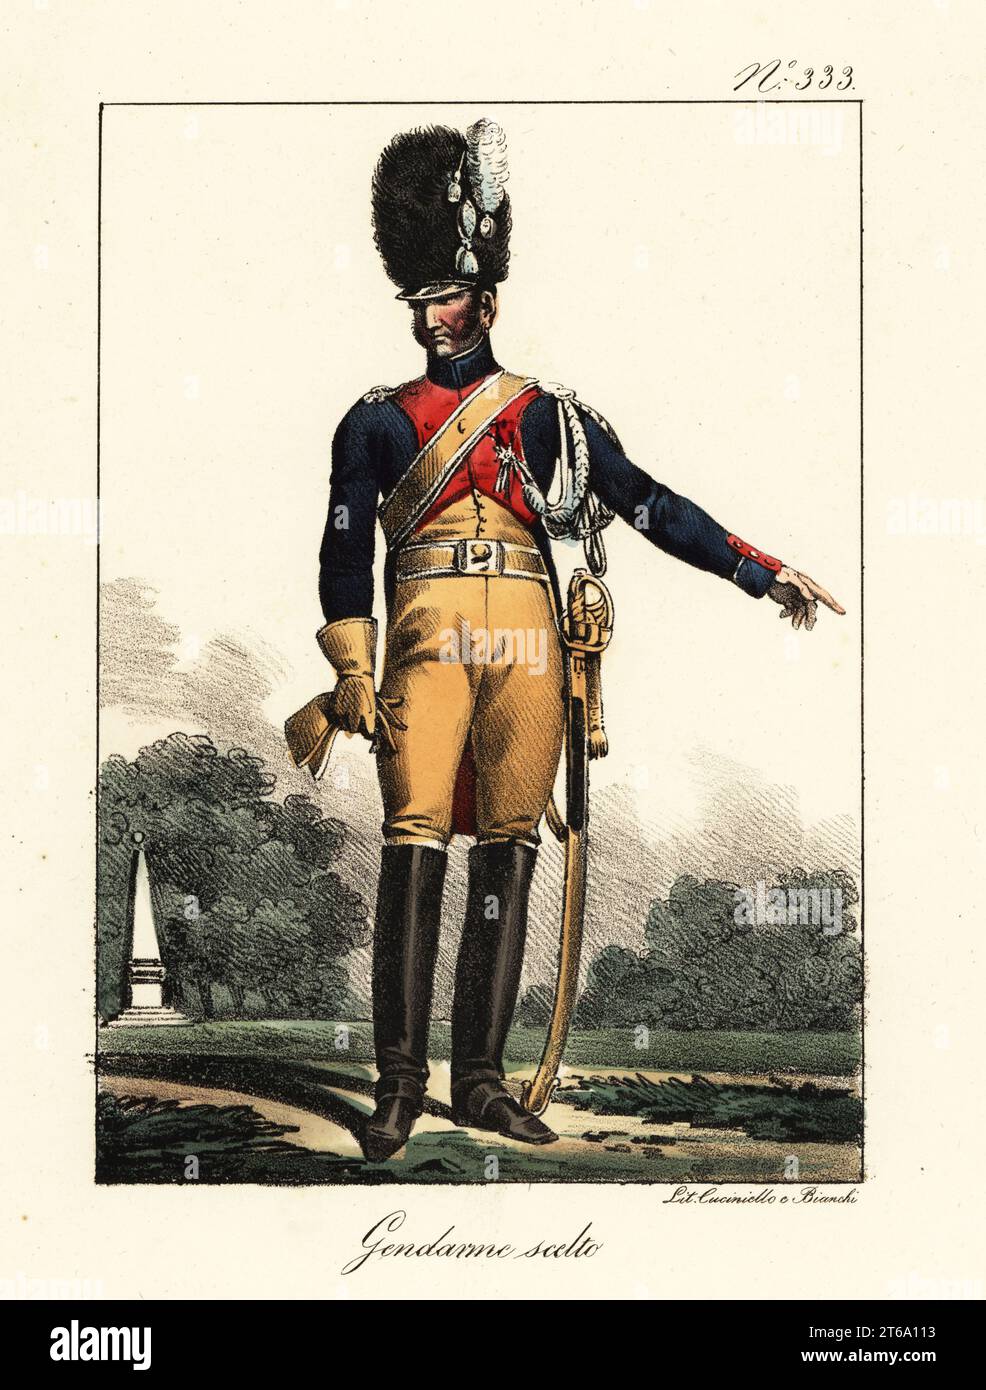 Uniform of the French Elite Gendarmes cavalry regiment, Napoleonic era. In plumed bearskin helmet, blue coat with red lapels, buff breeches, boots, armed with sabre. Gendarme d'Elite, Garde Imperiale. Handcoloured lithograph by Lorenzo Bianchi and Domenico Cuciniello after Hippolyte Lecomte from Costumi civili e militari della monarchia francese dal 1200 al 1820, Naples, 1825. Italian edition of Lecomtes Civilian and military costumes of the French monarchy from 1200 to 1820. Stock Photo